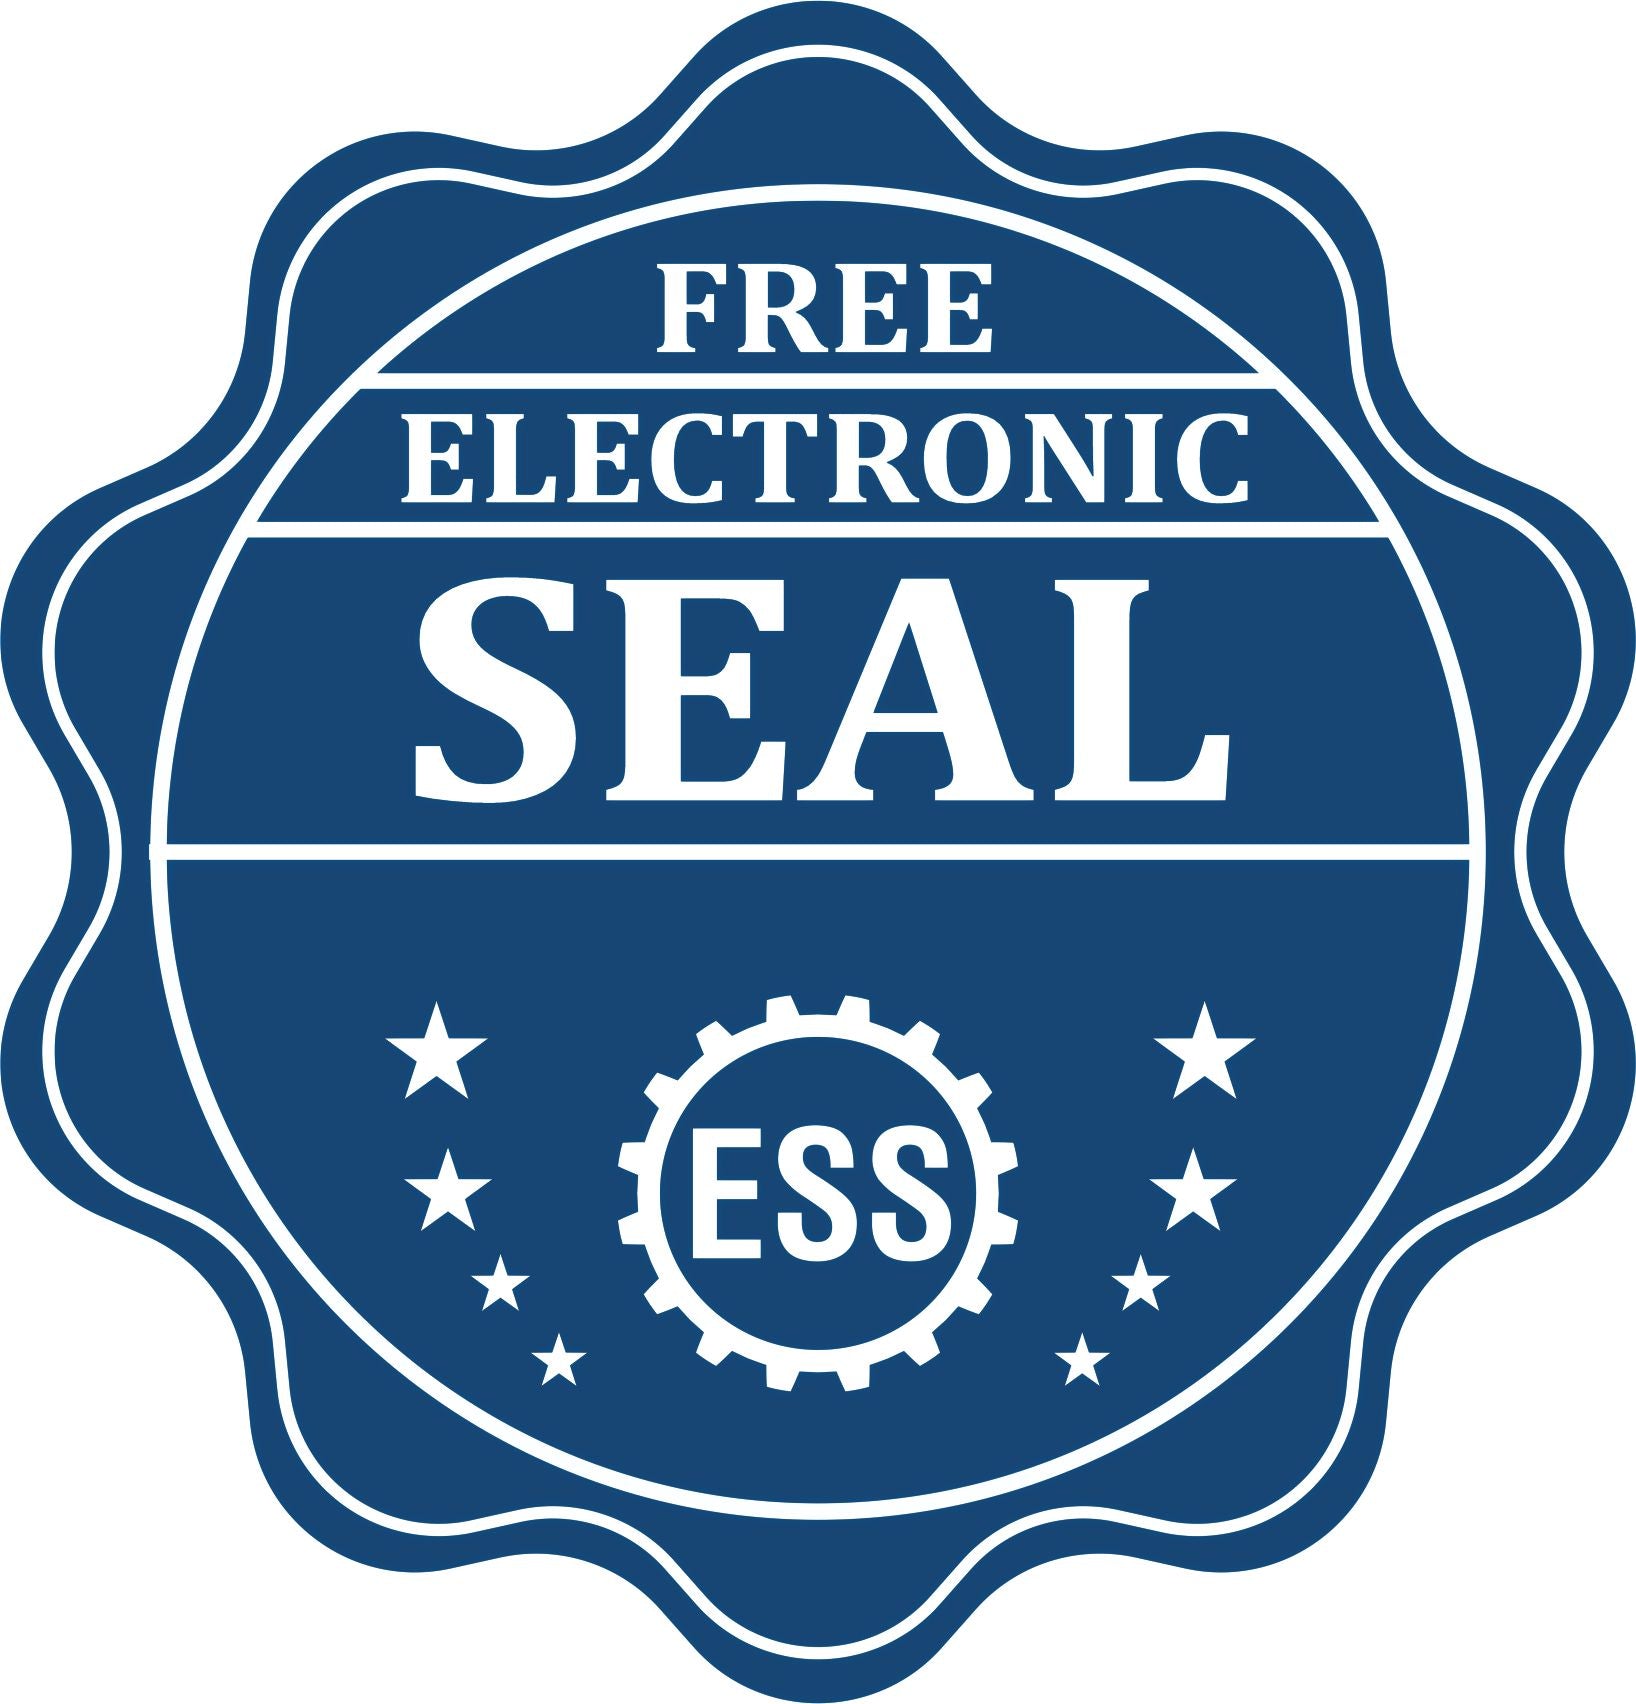 A badge showing a free electronic seal for the MaxLight Premium Pre-Inked Michigan State Seal Notarial Stamp with stars and the ESS gear on the emblem.